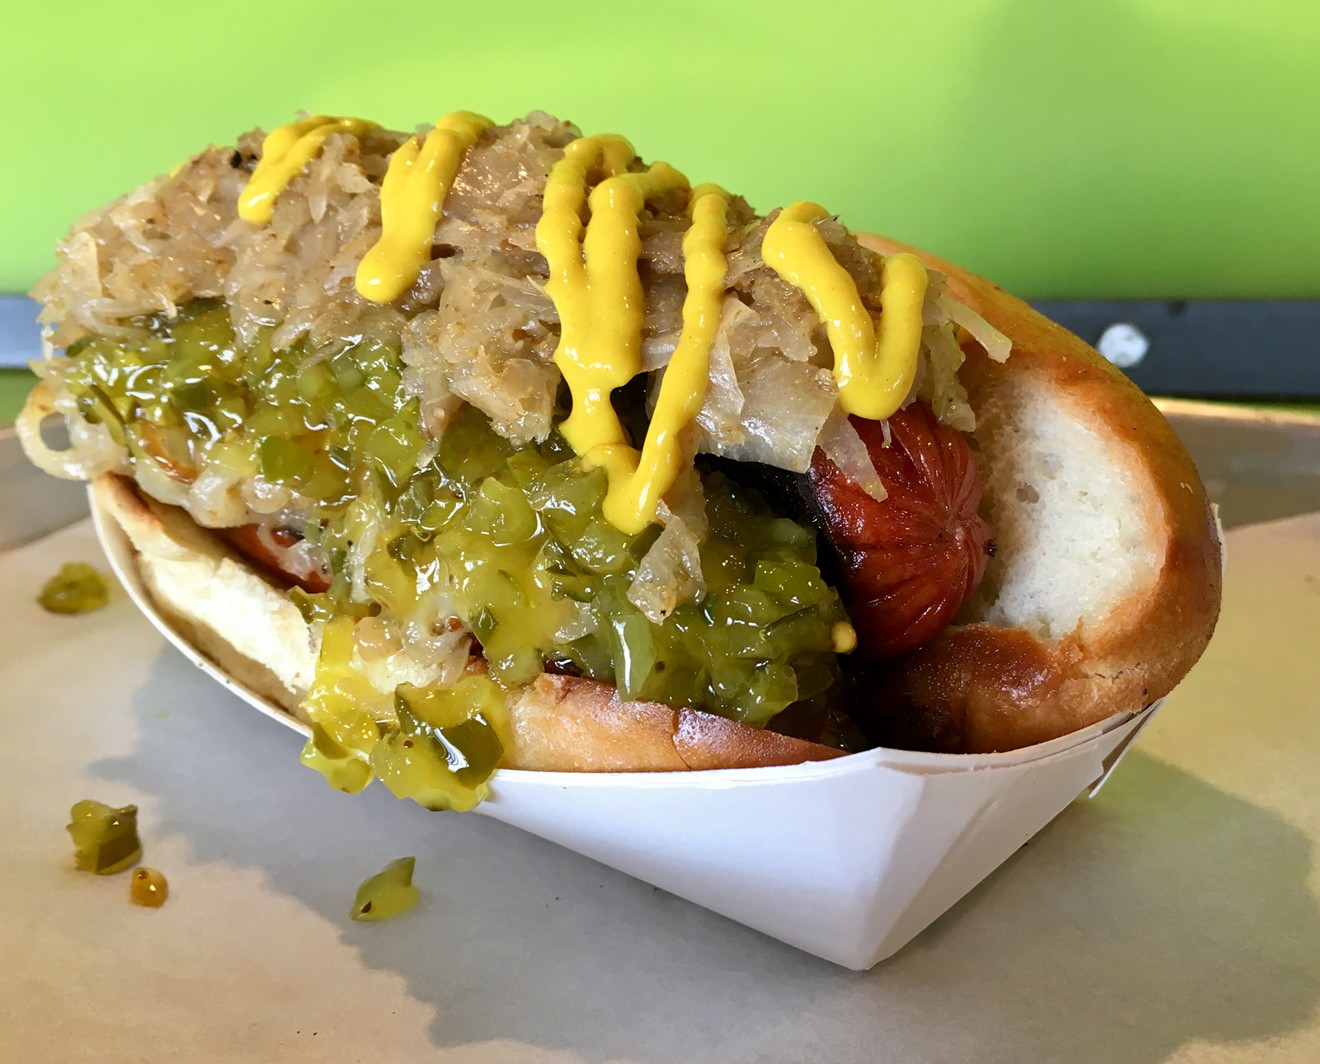 Tender, nutmeg-forward sauerkraut, griddled onions and relish top the Sidecar dog at Pints & Quarts ($6.25).